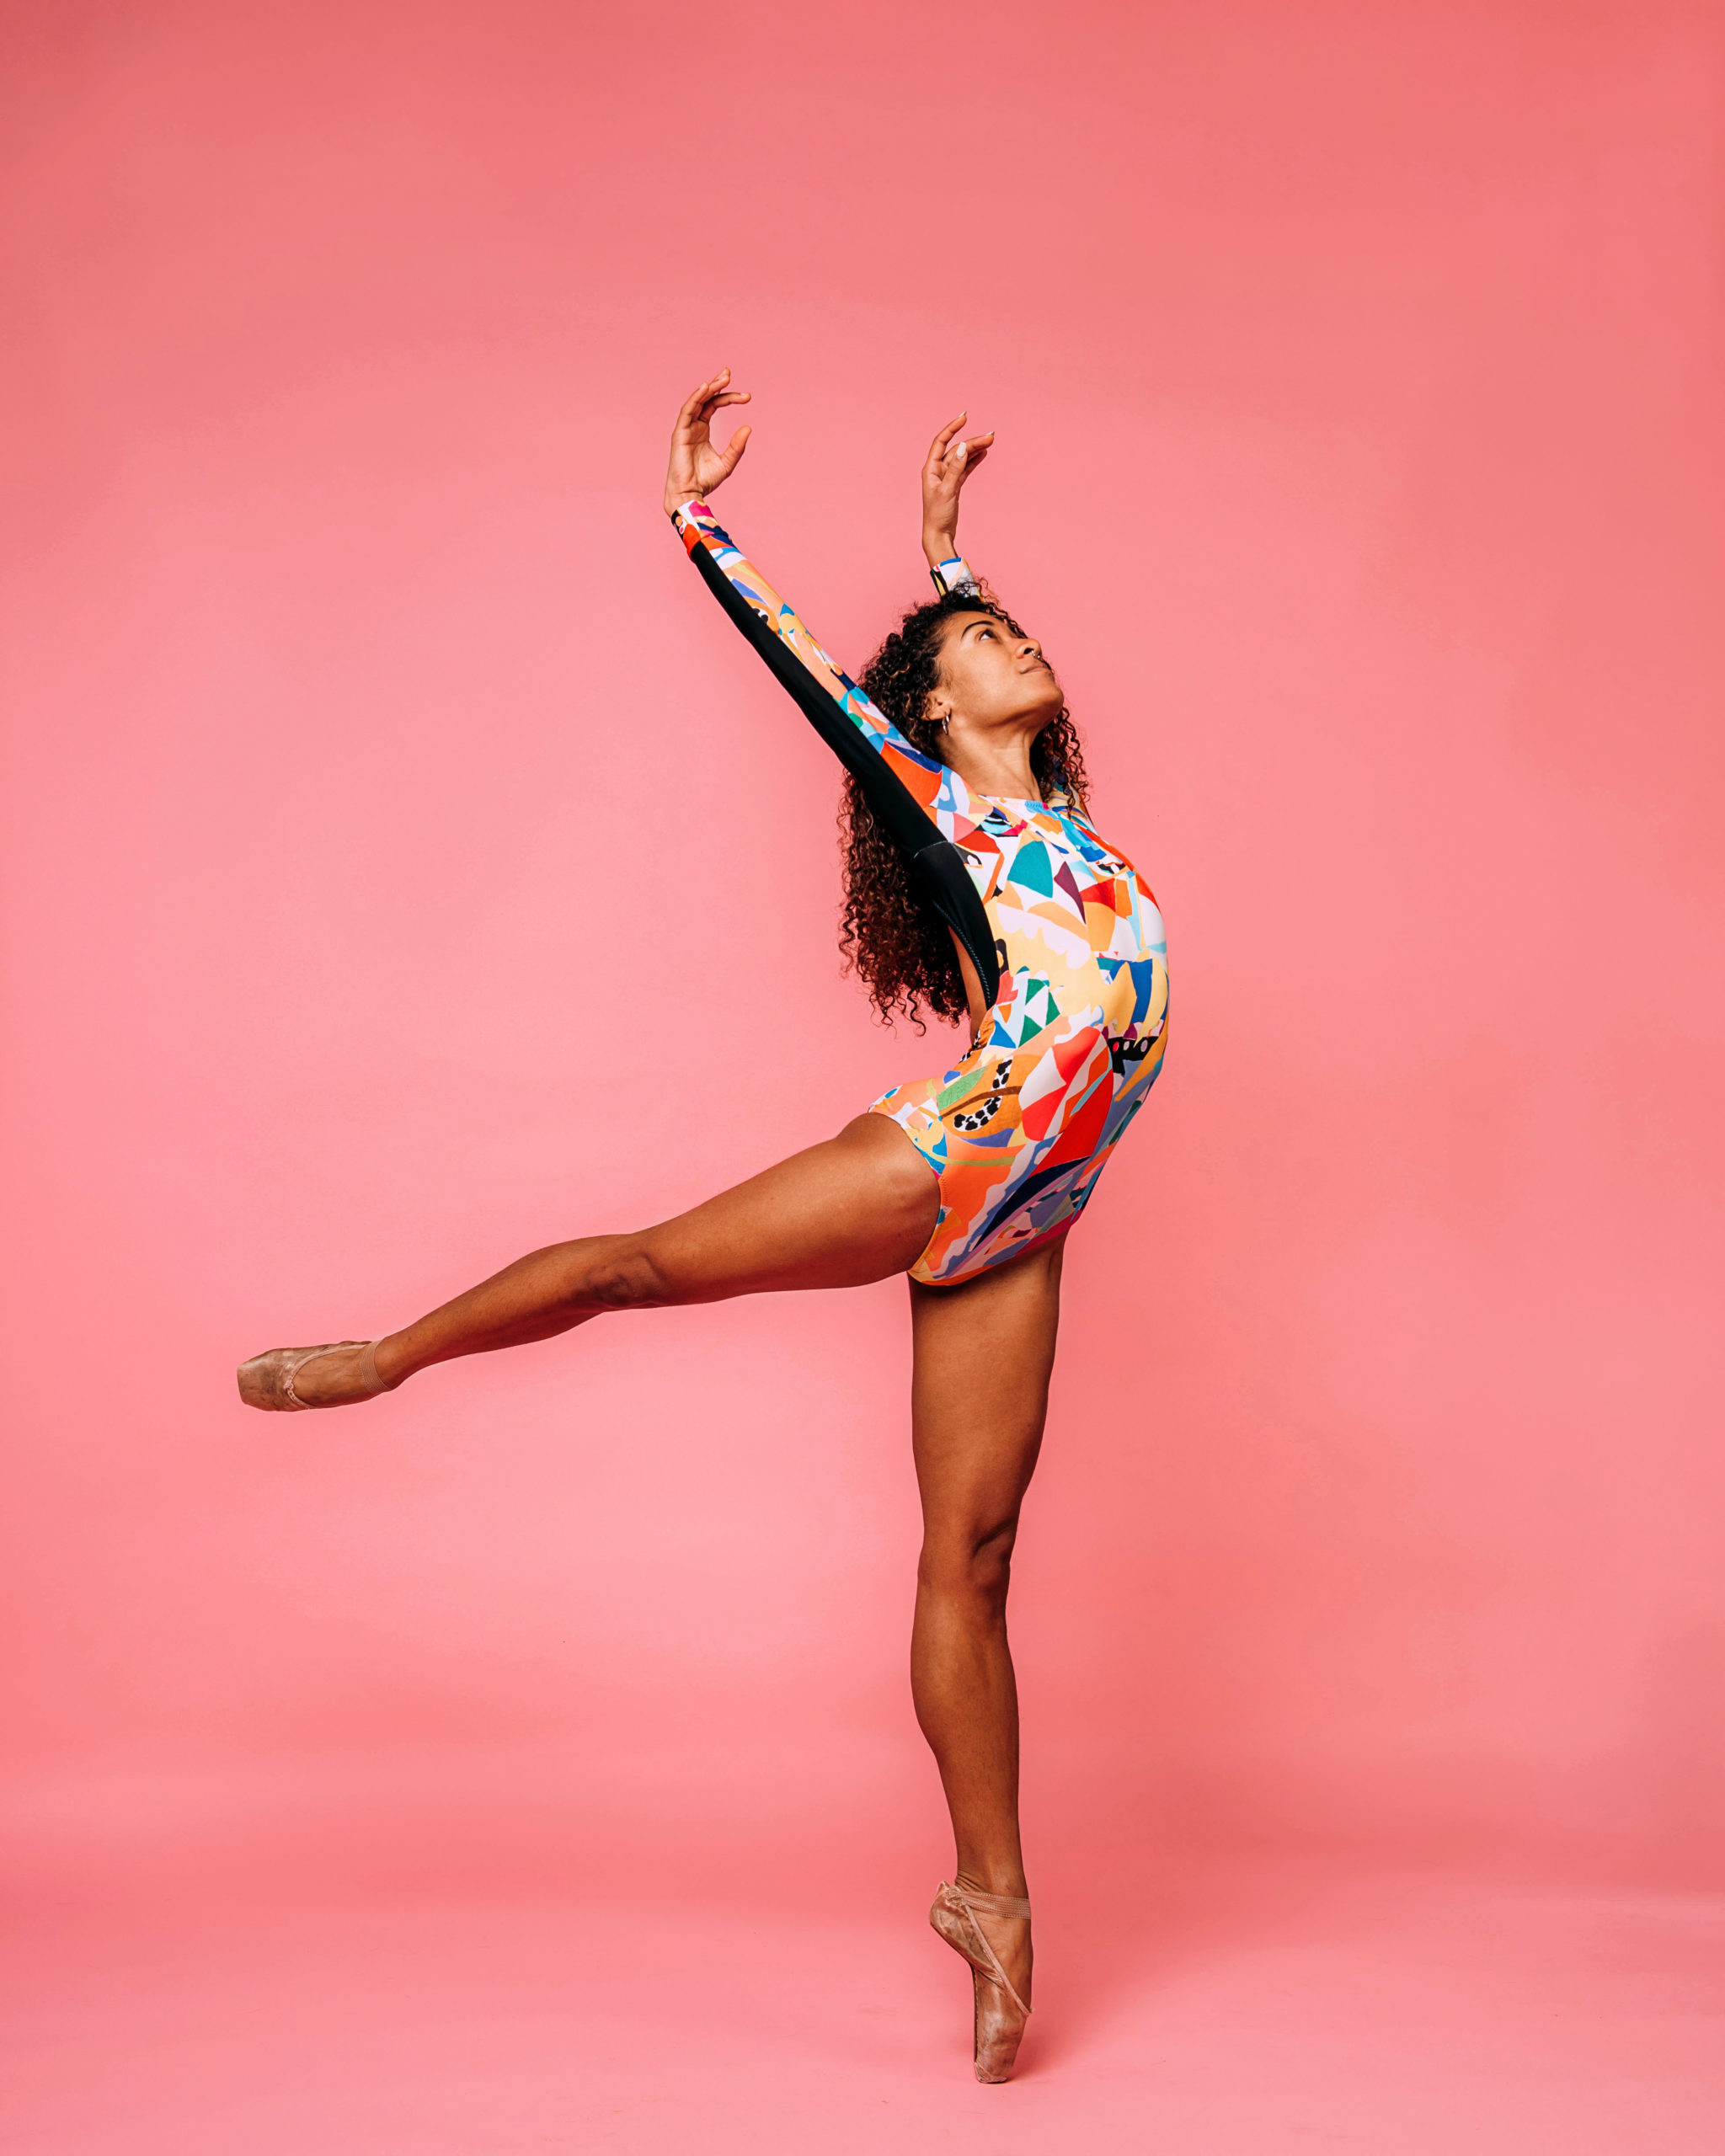 Princess Reid poses in a low arabesque, arms lifted above her head and head turned upward confidently, in a multicolored long-sleeve leotard. Her long brown hair is down, and she dances on pointe in front of a rosy pink backdrop.